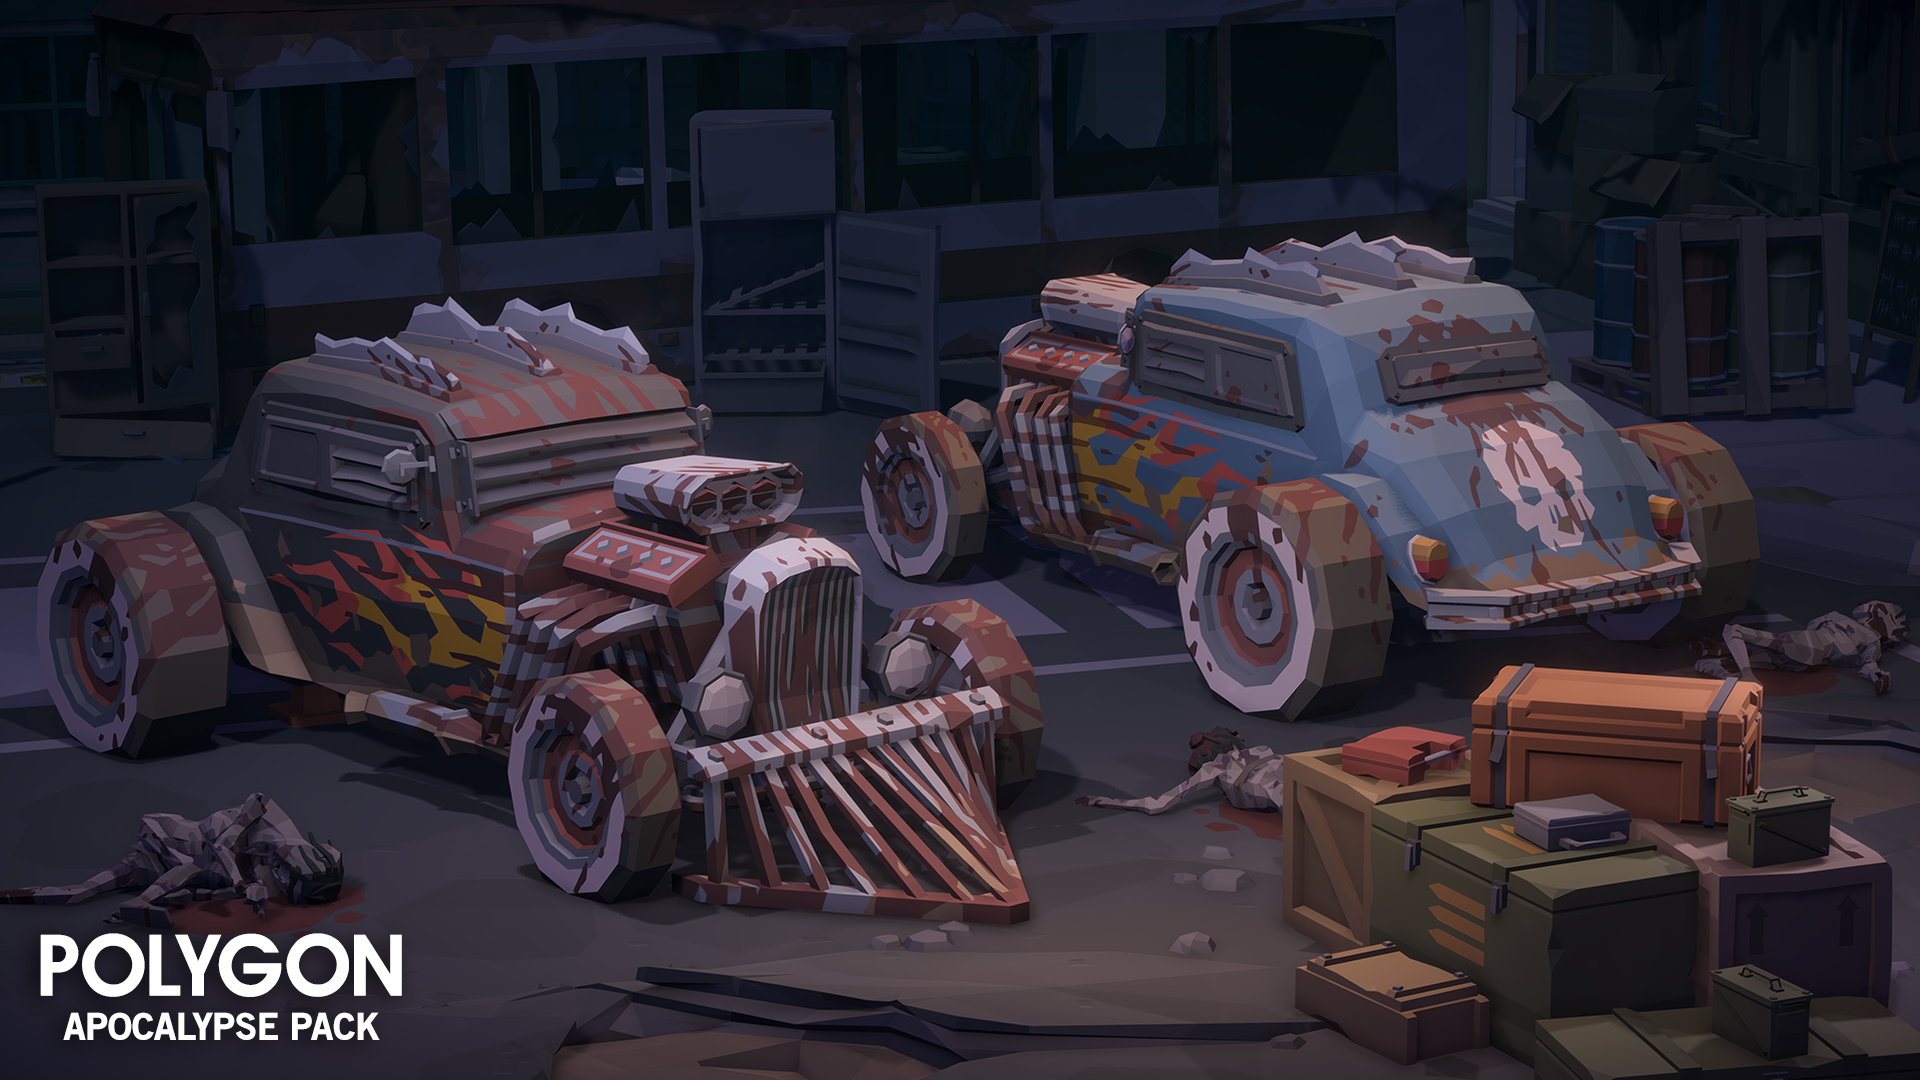 Apocalypse Pack 3D low poly monster truck assets for game development